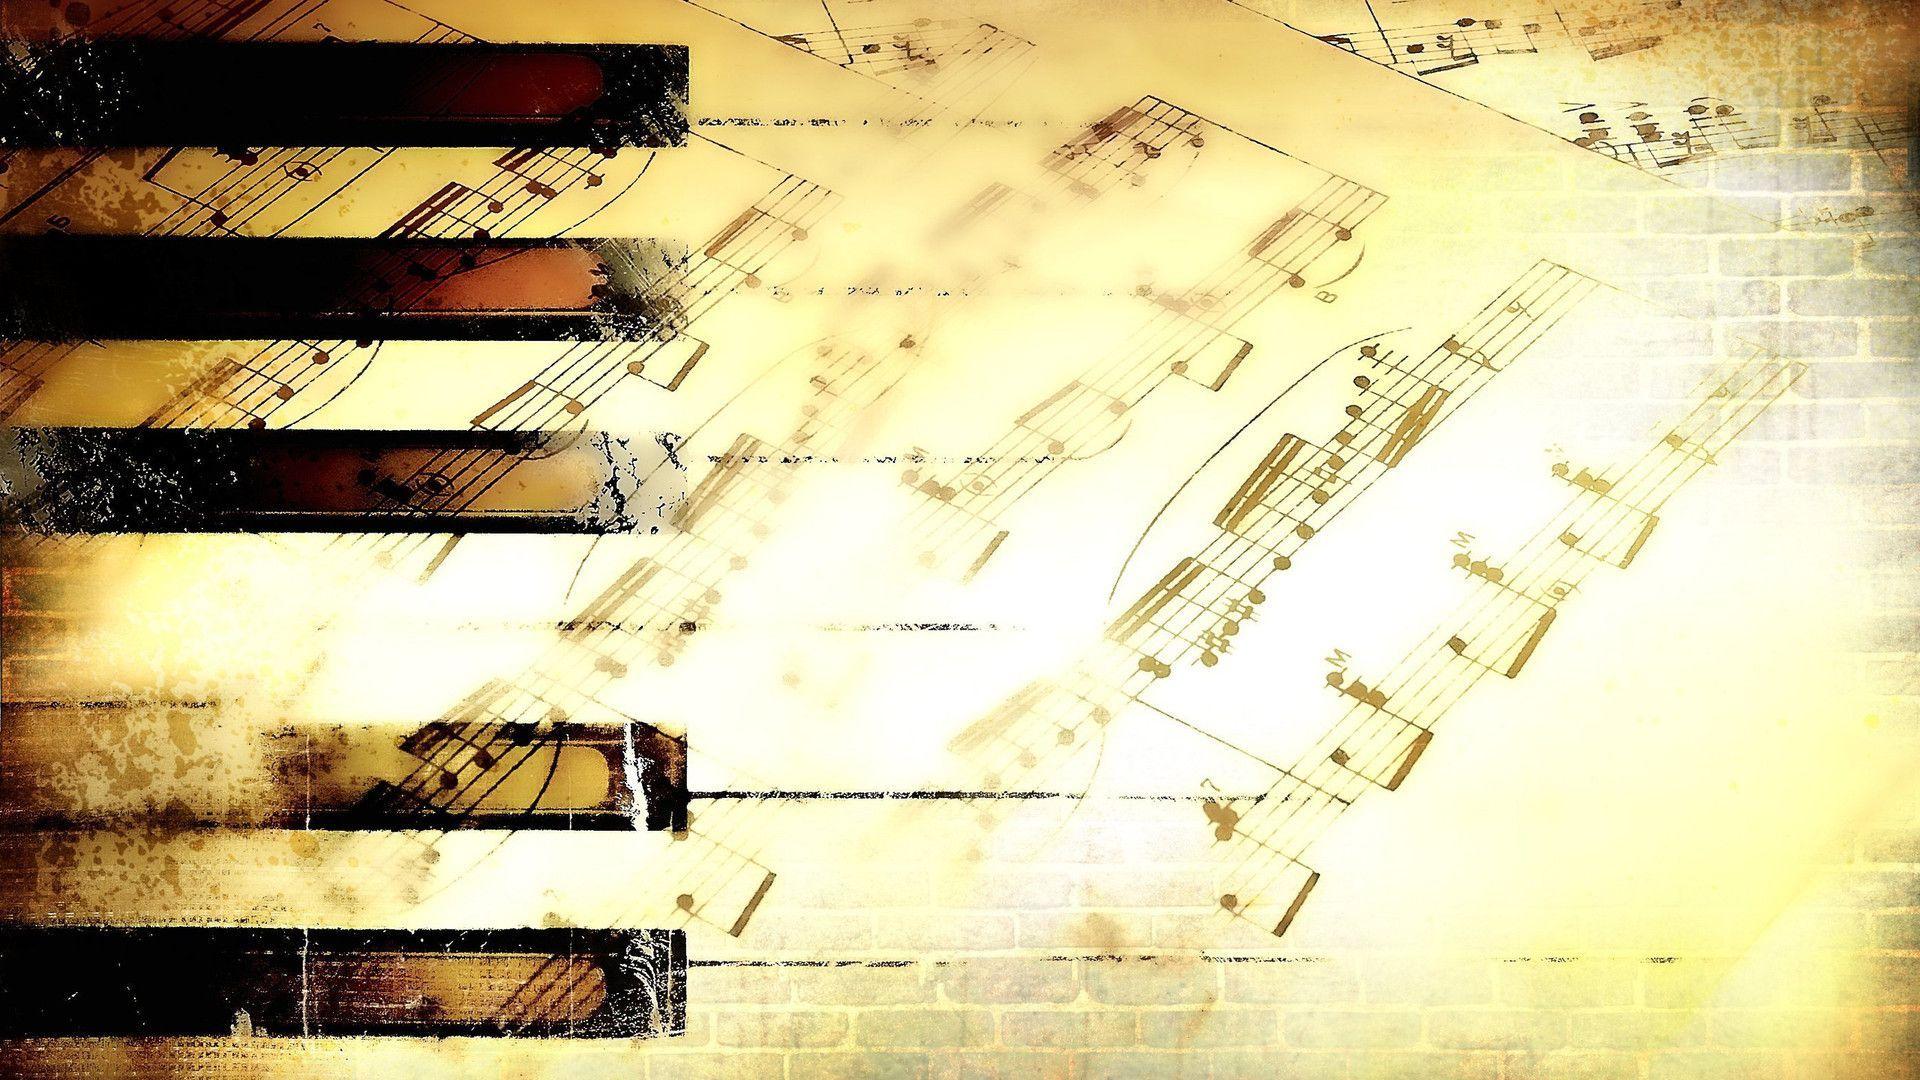 Wallpaper Music Note Notes 1920x1080 #music note. Piano